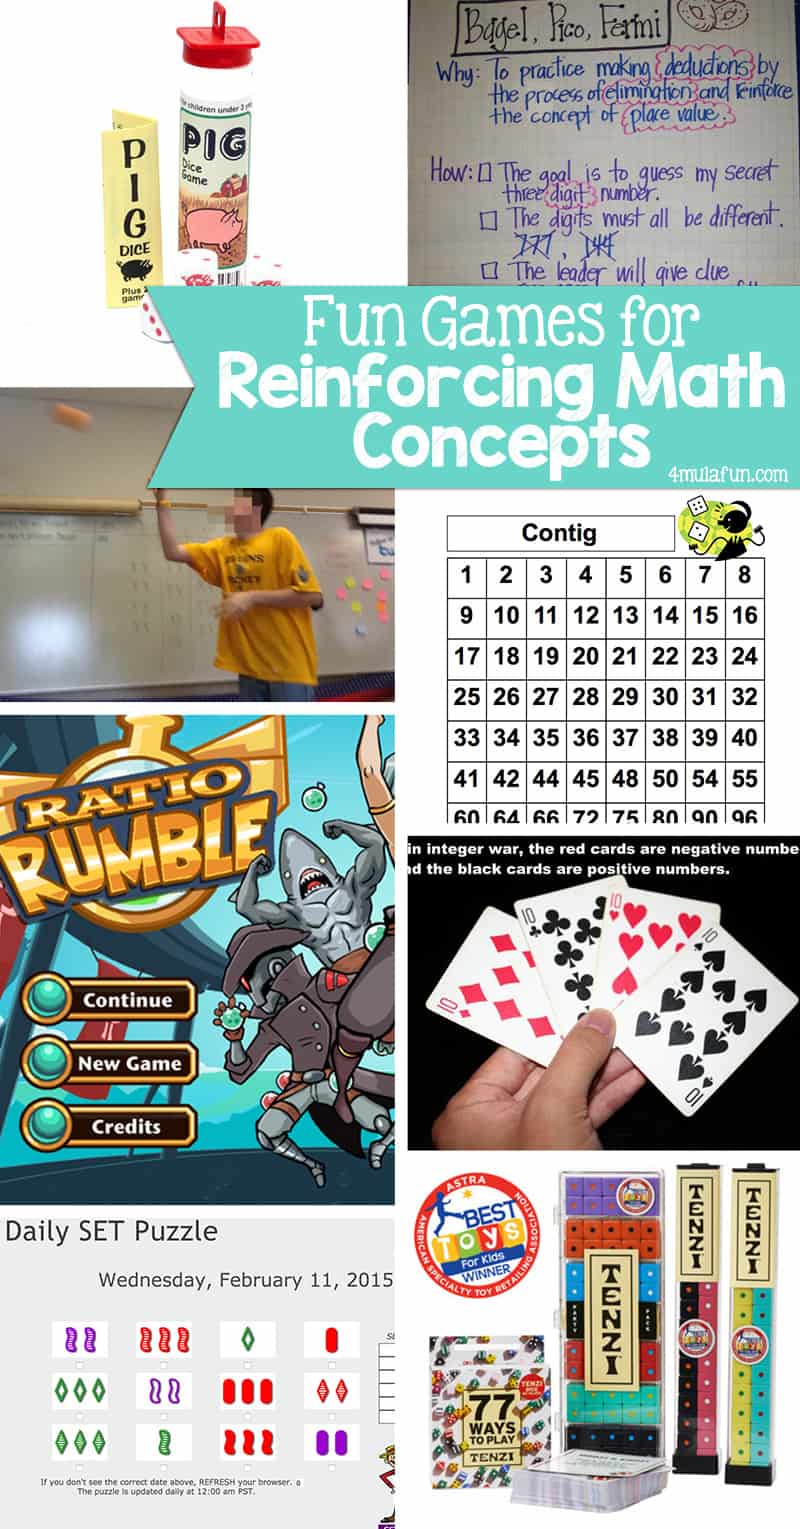 Fun Games for Reinforcing Math Concepts – a round up of games and fun activities that reinforce math concepts and more! 